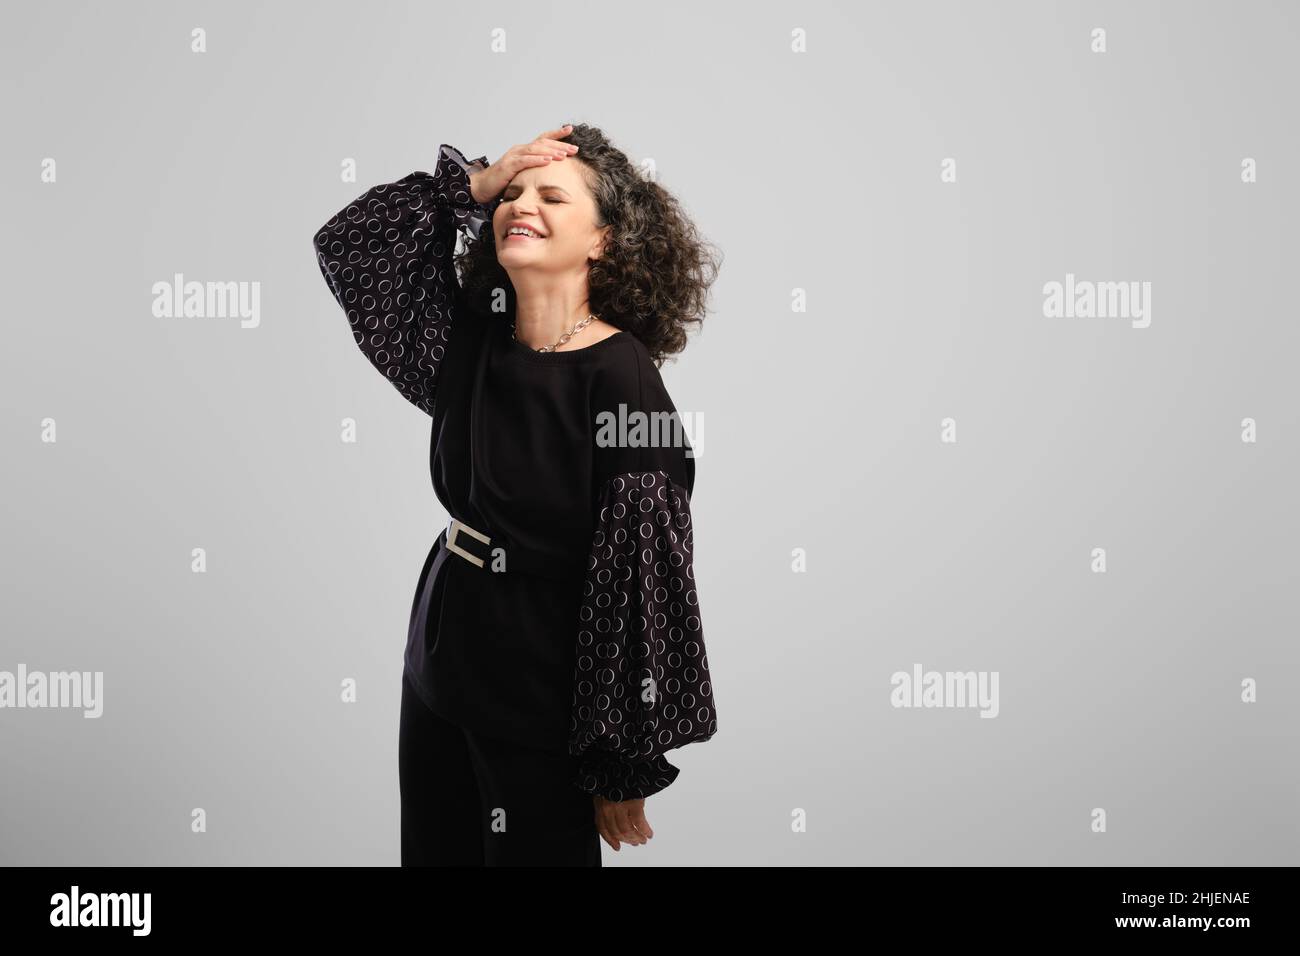 Very happy senior woman with lush curly hair laughing in studio over grey background Stock Photo